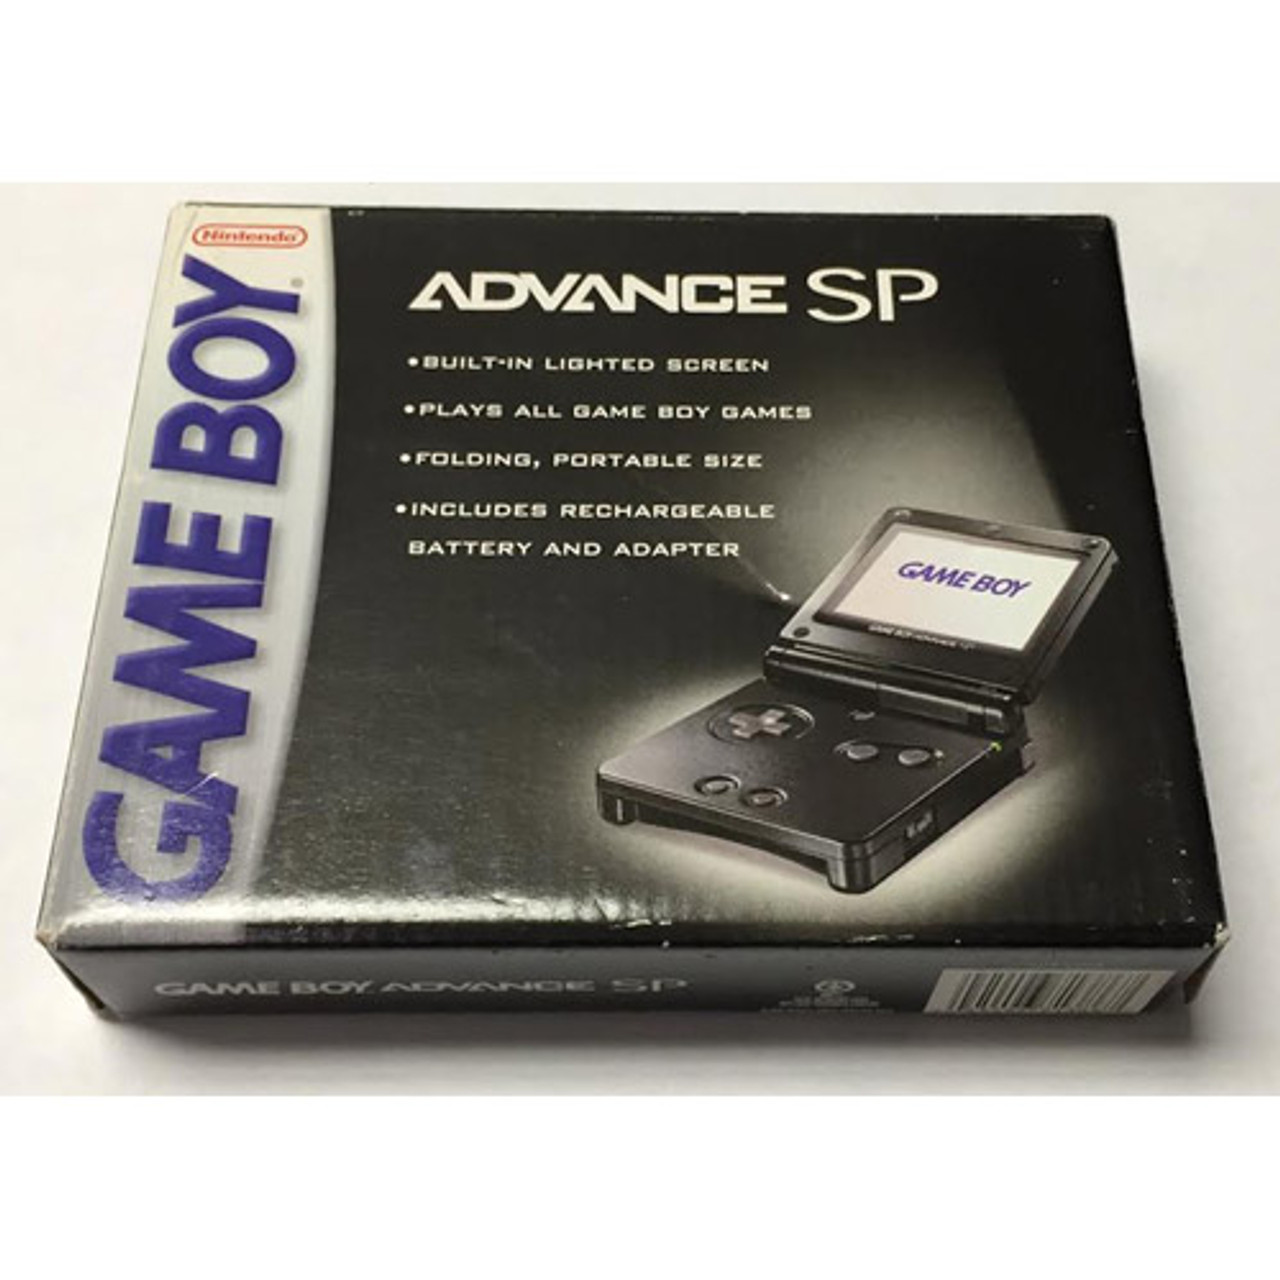 Game Boy Advance Sp System Black Complete In Box For Sale Dkoldies